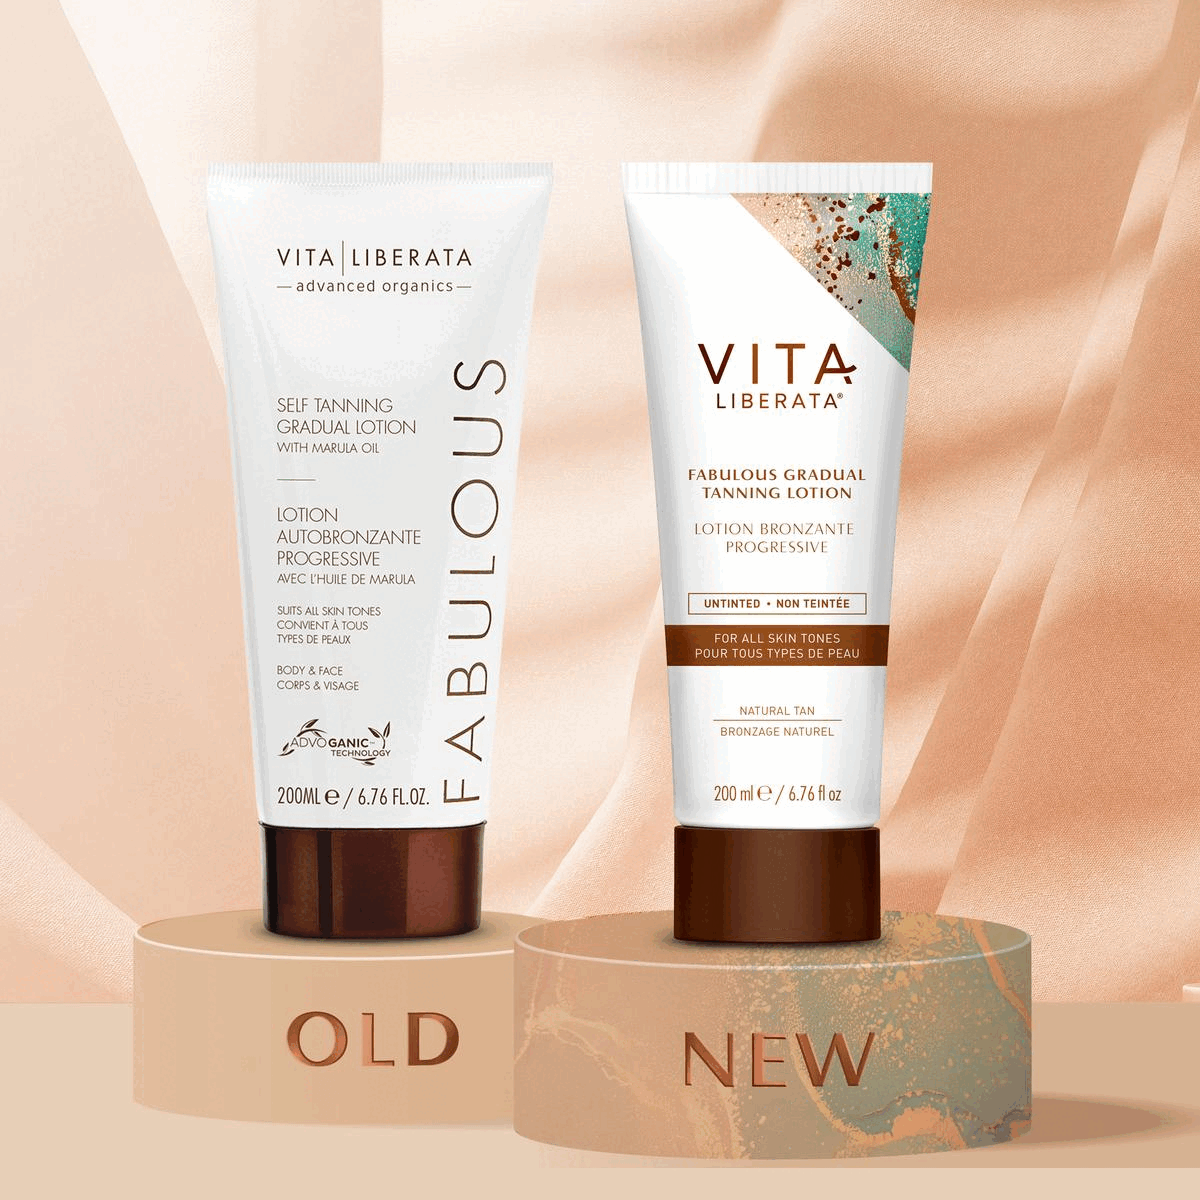 Image 1, Old and New packaging. Image 2, Real and Real Results before and after